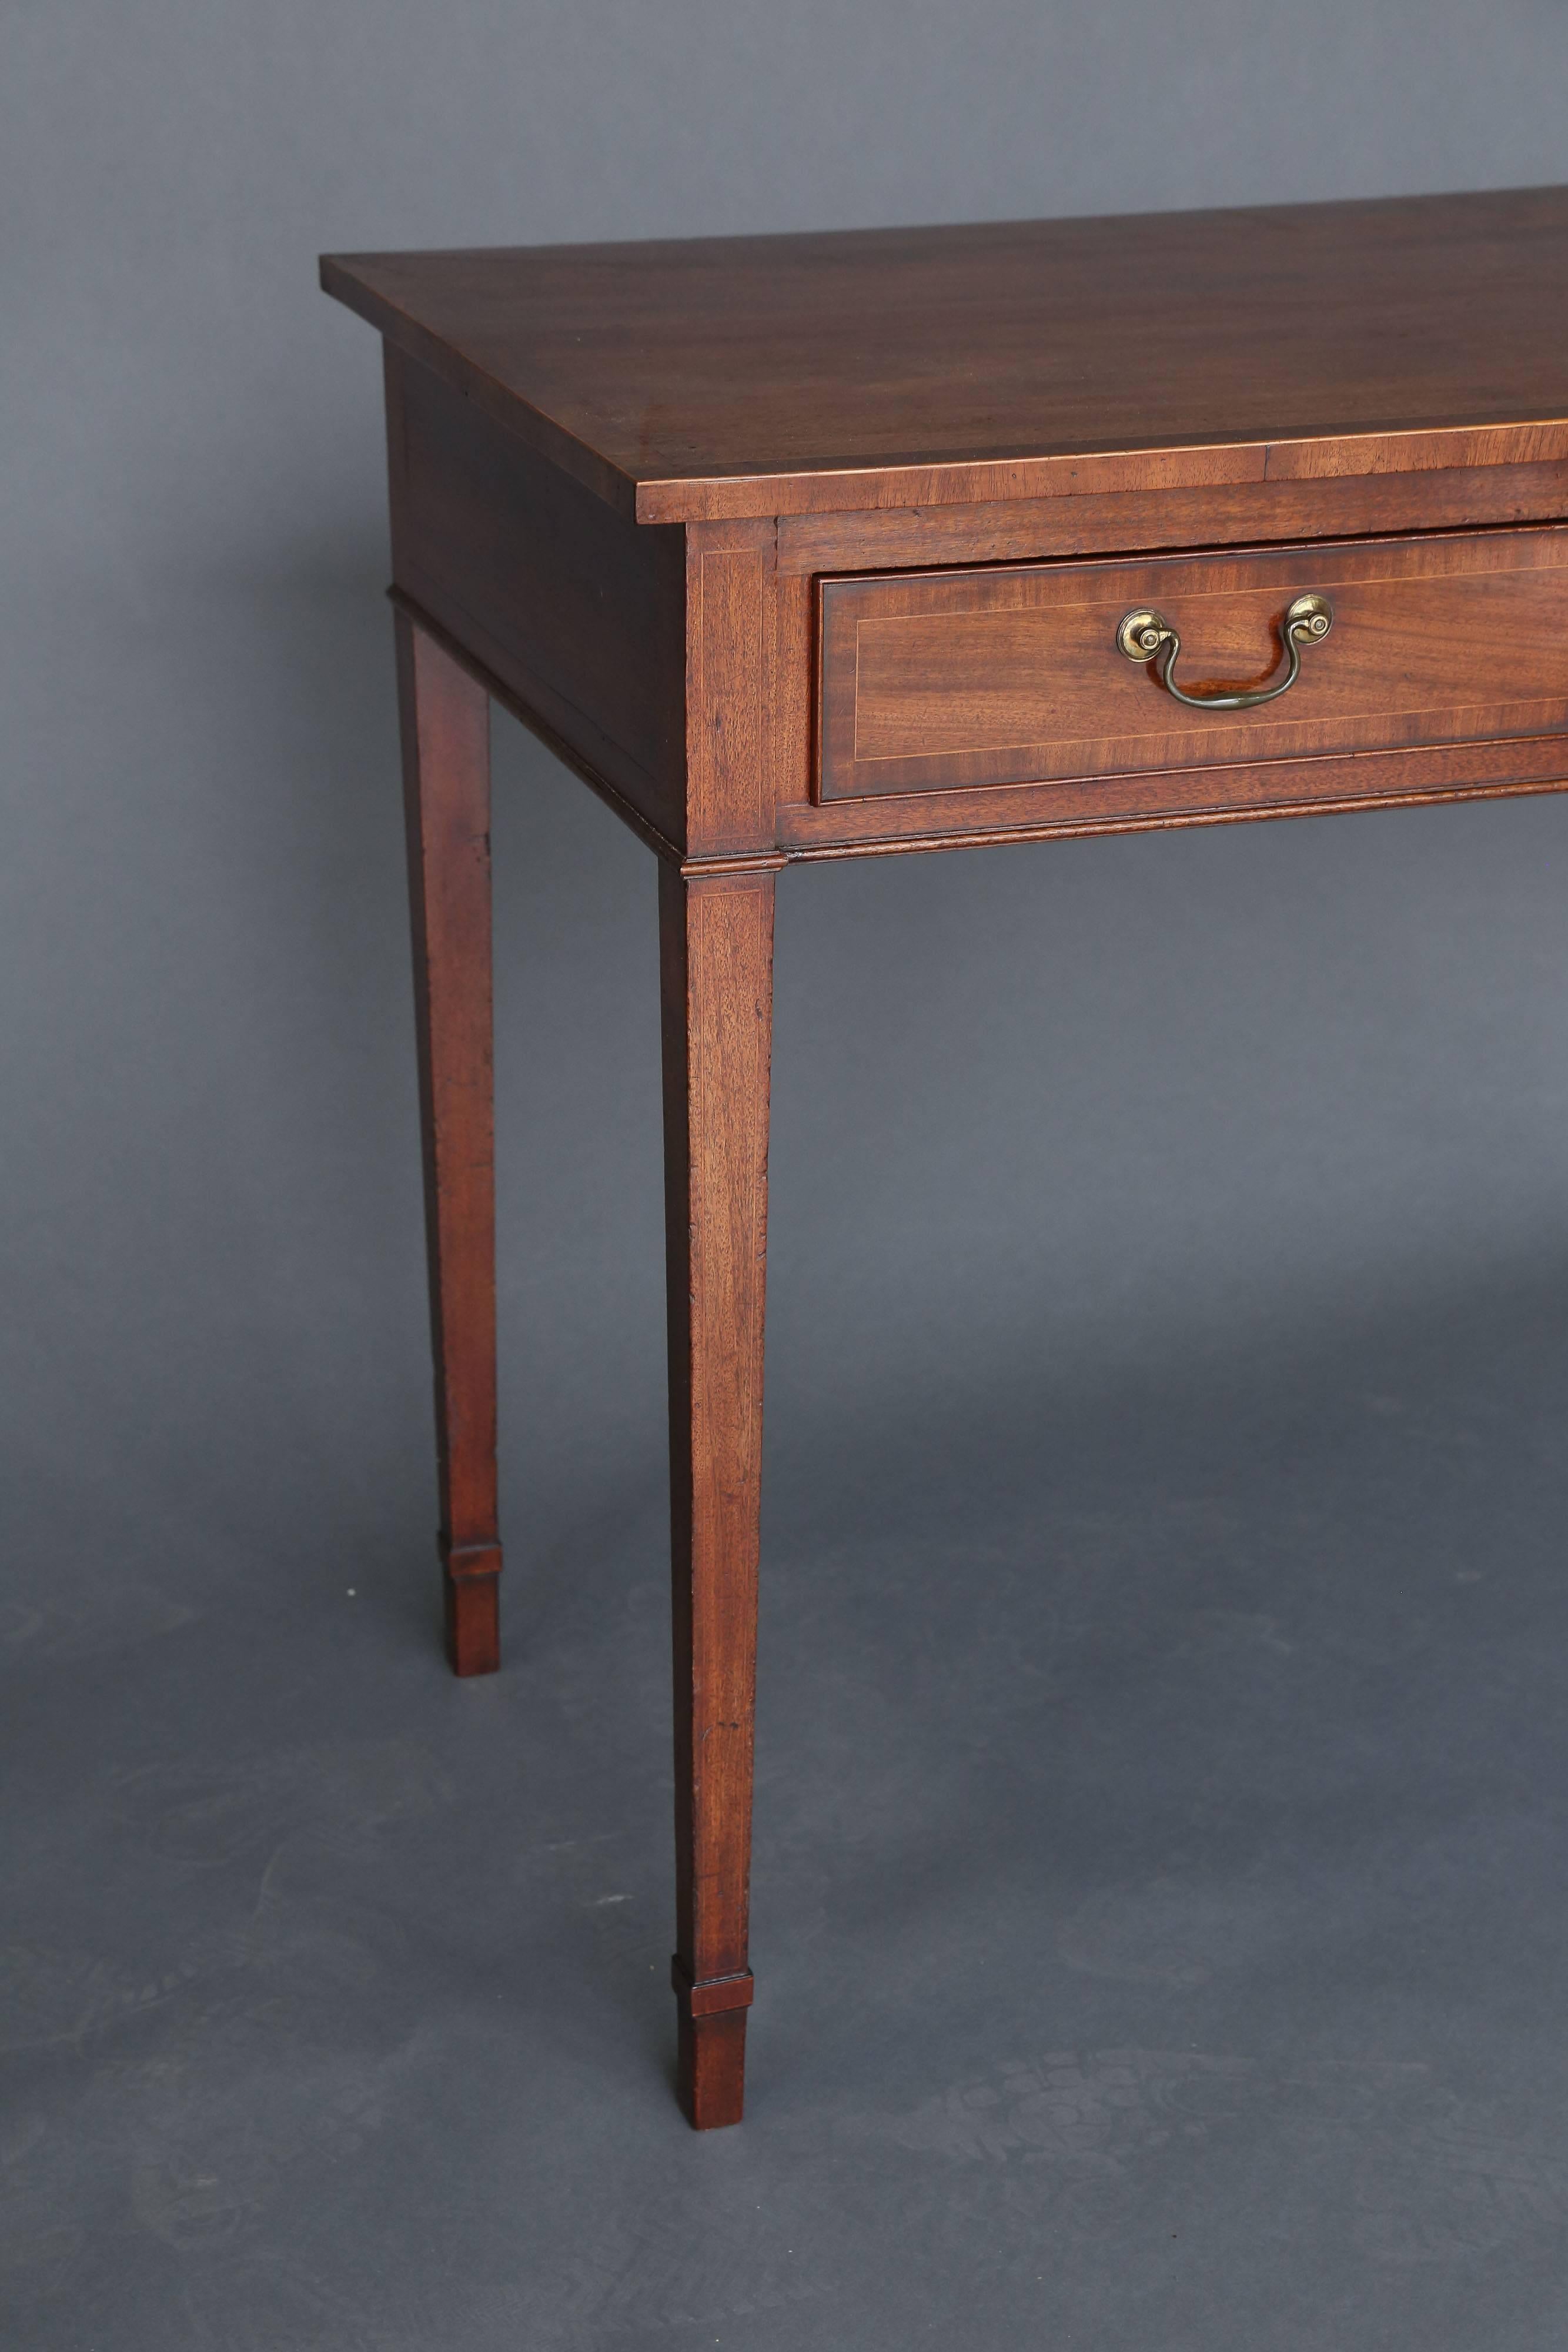 George III mahogany and crossbanded mahogany three-drawer server of excellent color raised on tapered legs with original swan neck brass.